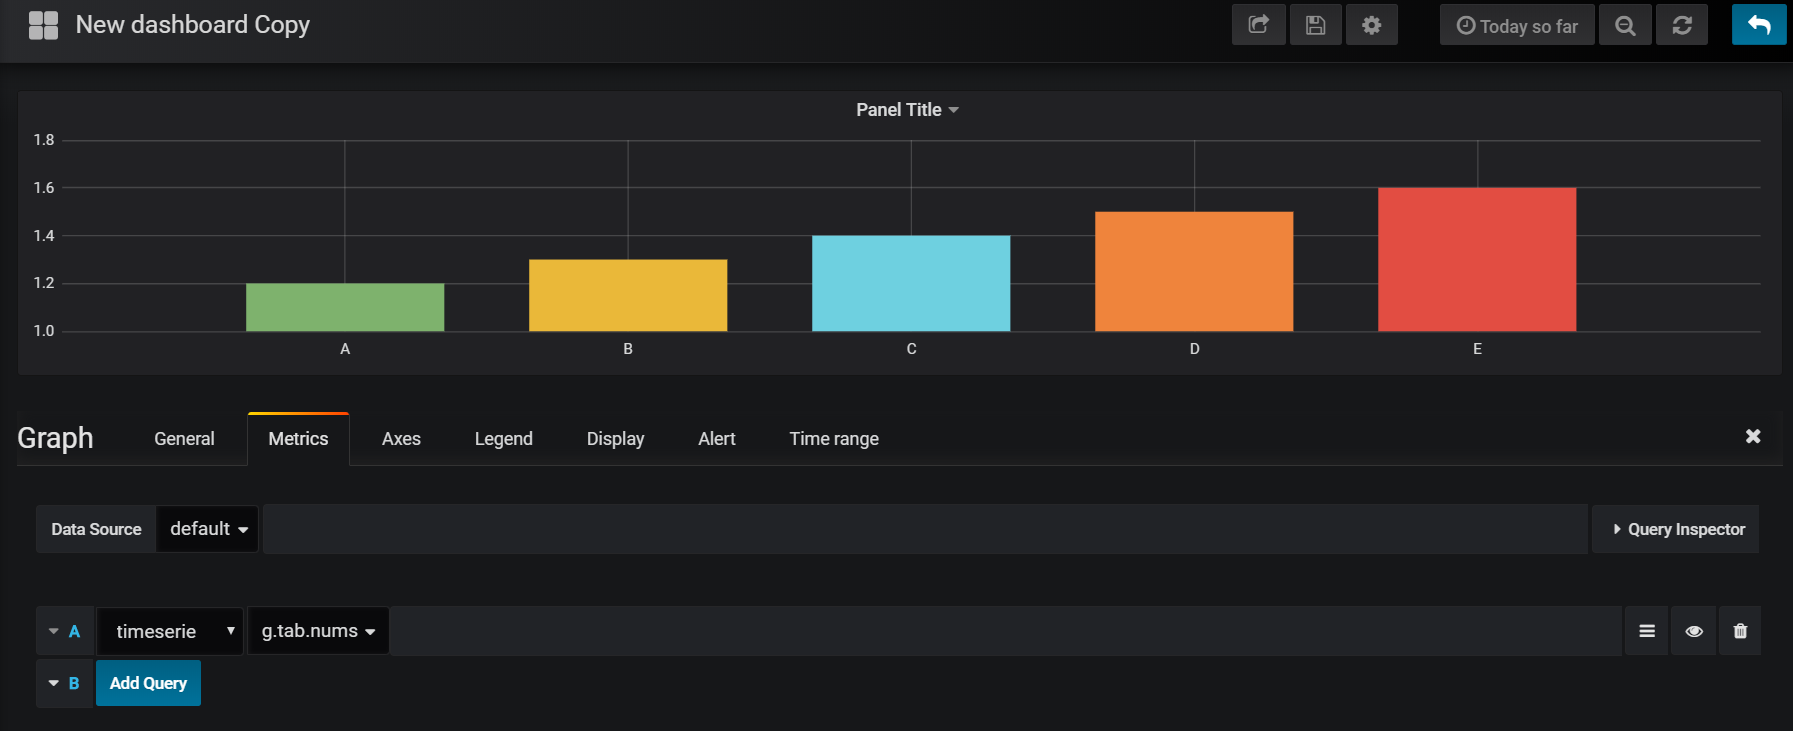 grafana graph panel showing result of displaying keyed table 'tab' arranged by 'nums' value. The data is displayed as a bar chart against a sym value.